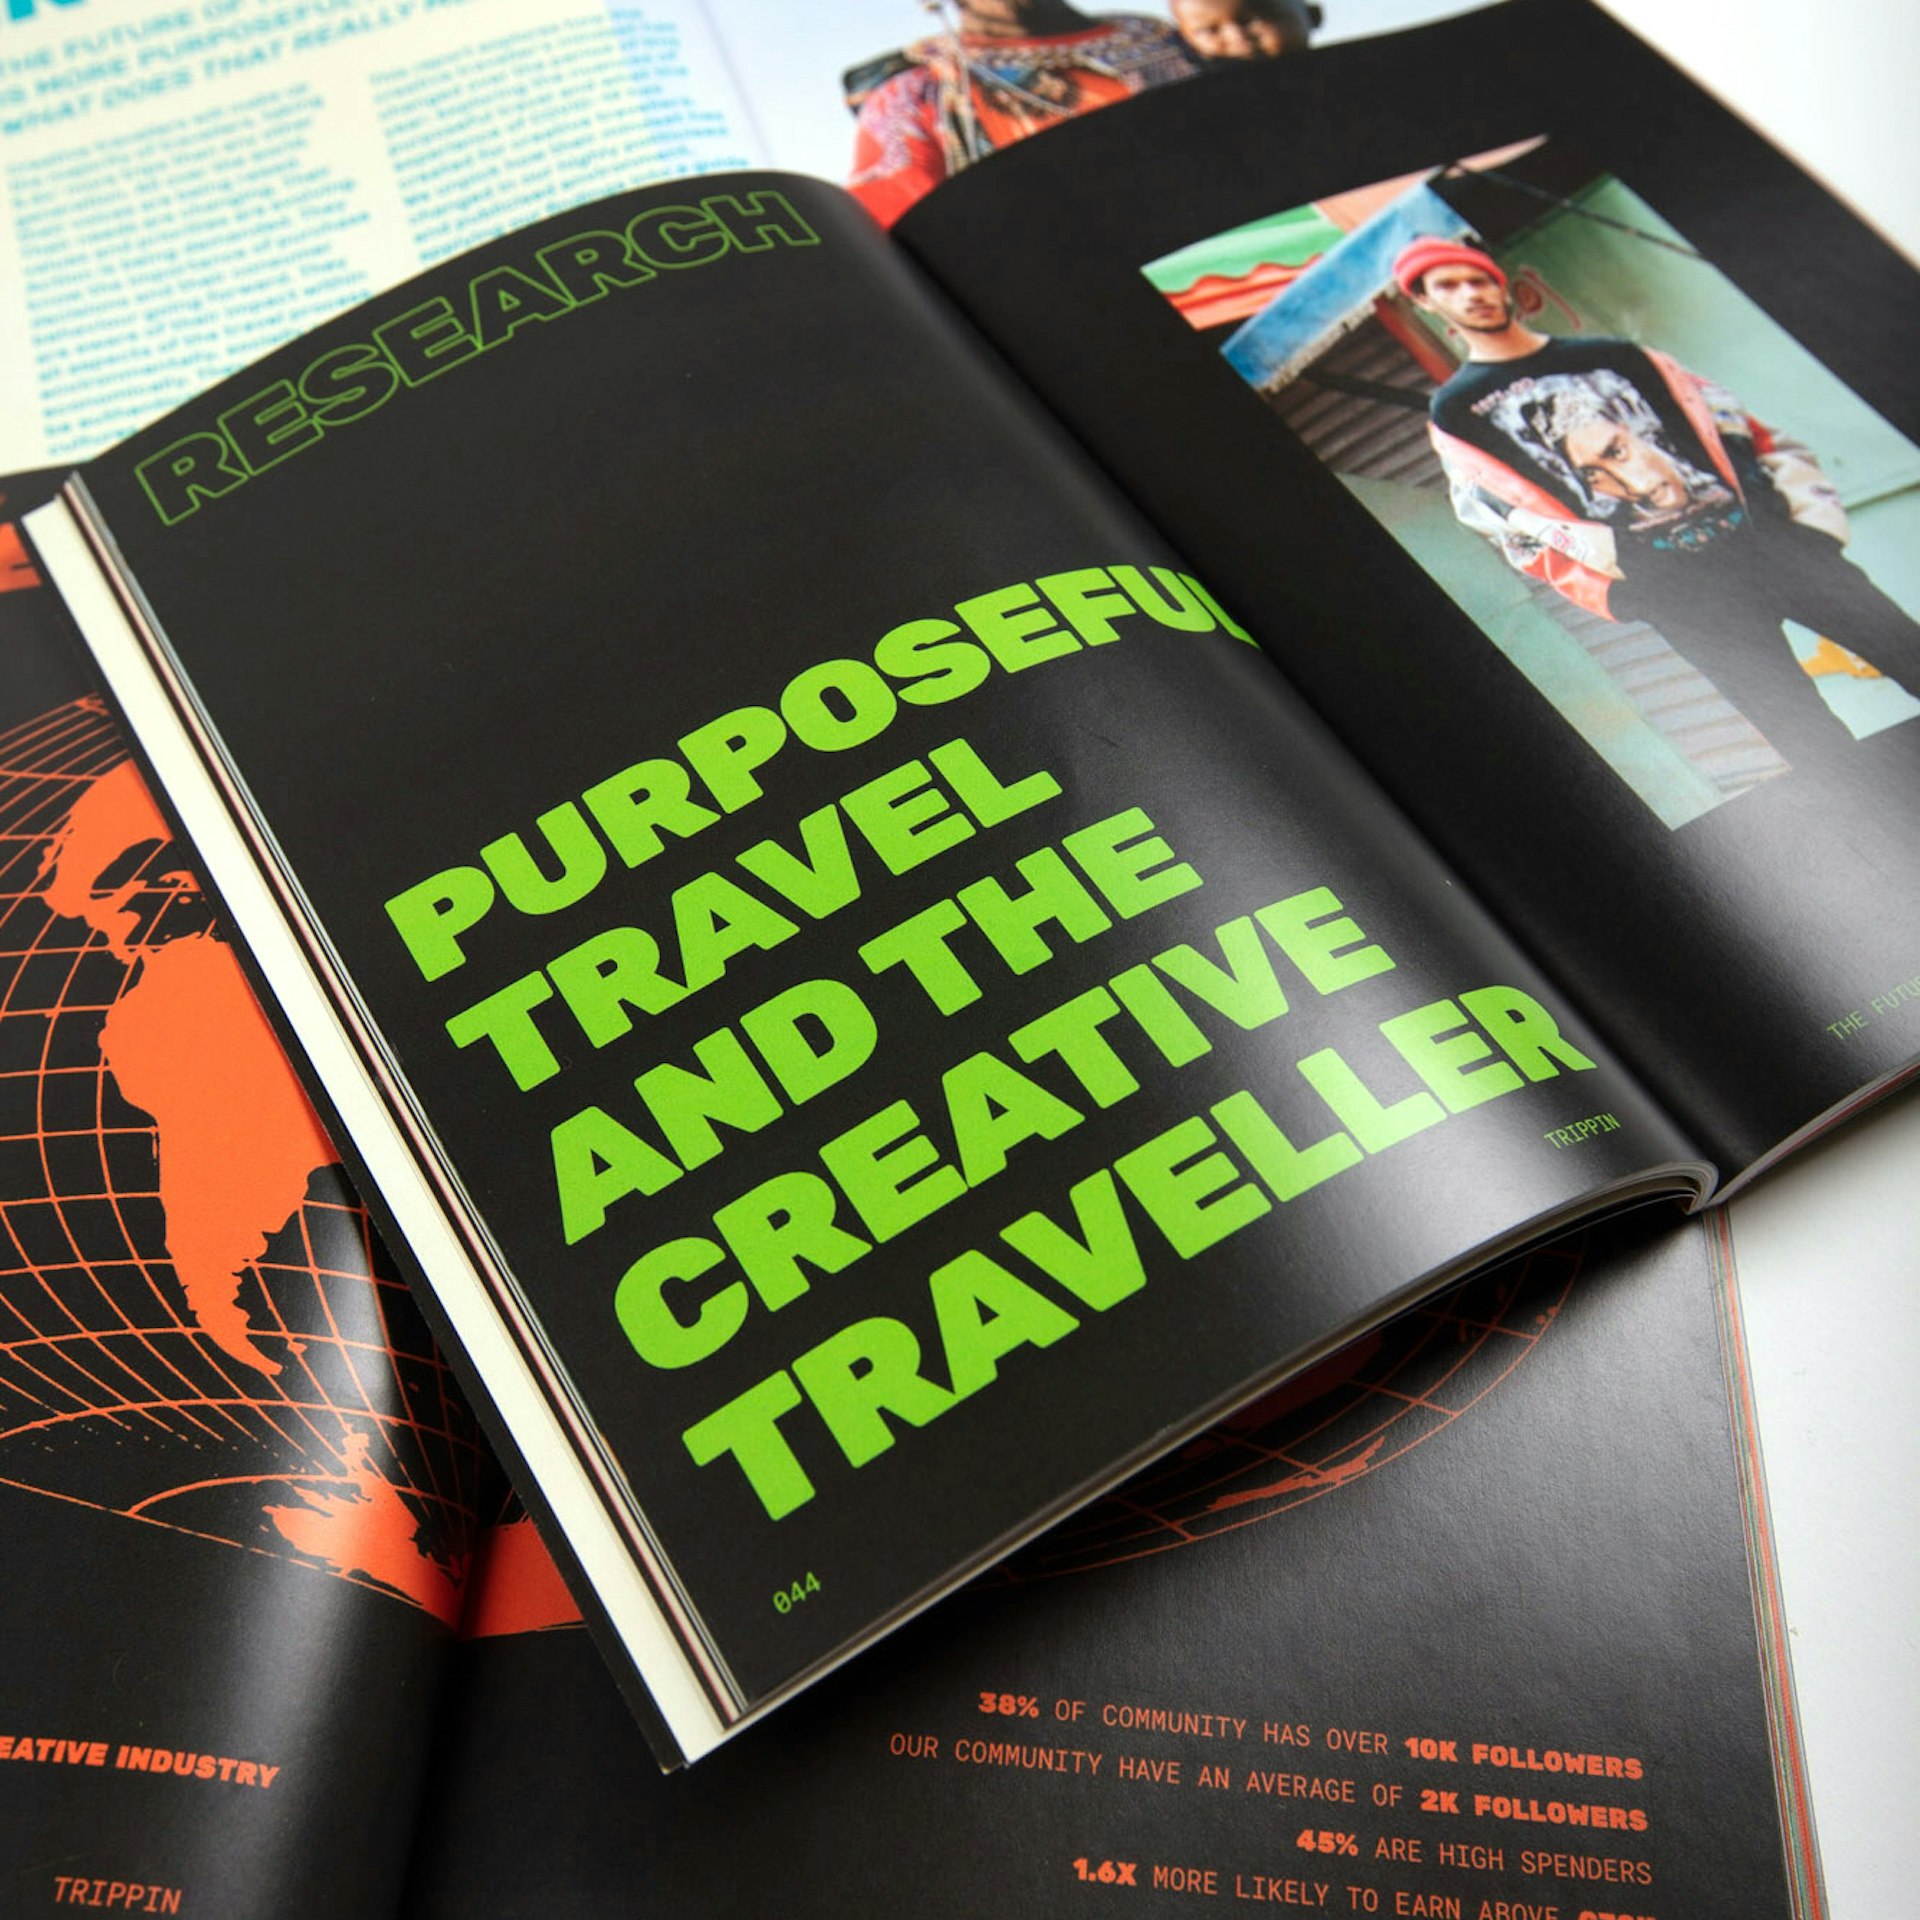 An inside spread of the Trippin report, with the headline "purposeful travel and the creative traveler" and breaking down data of followers